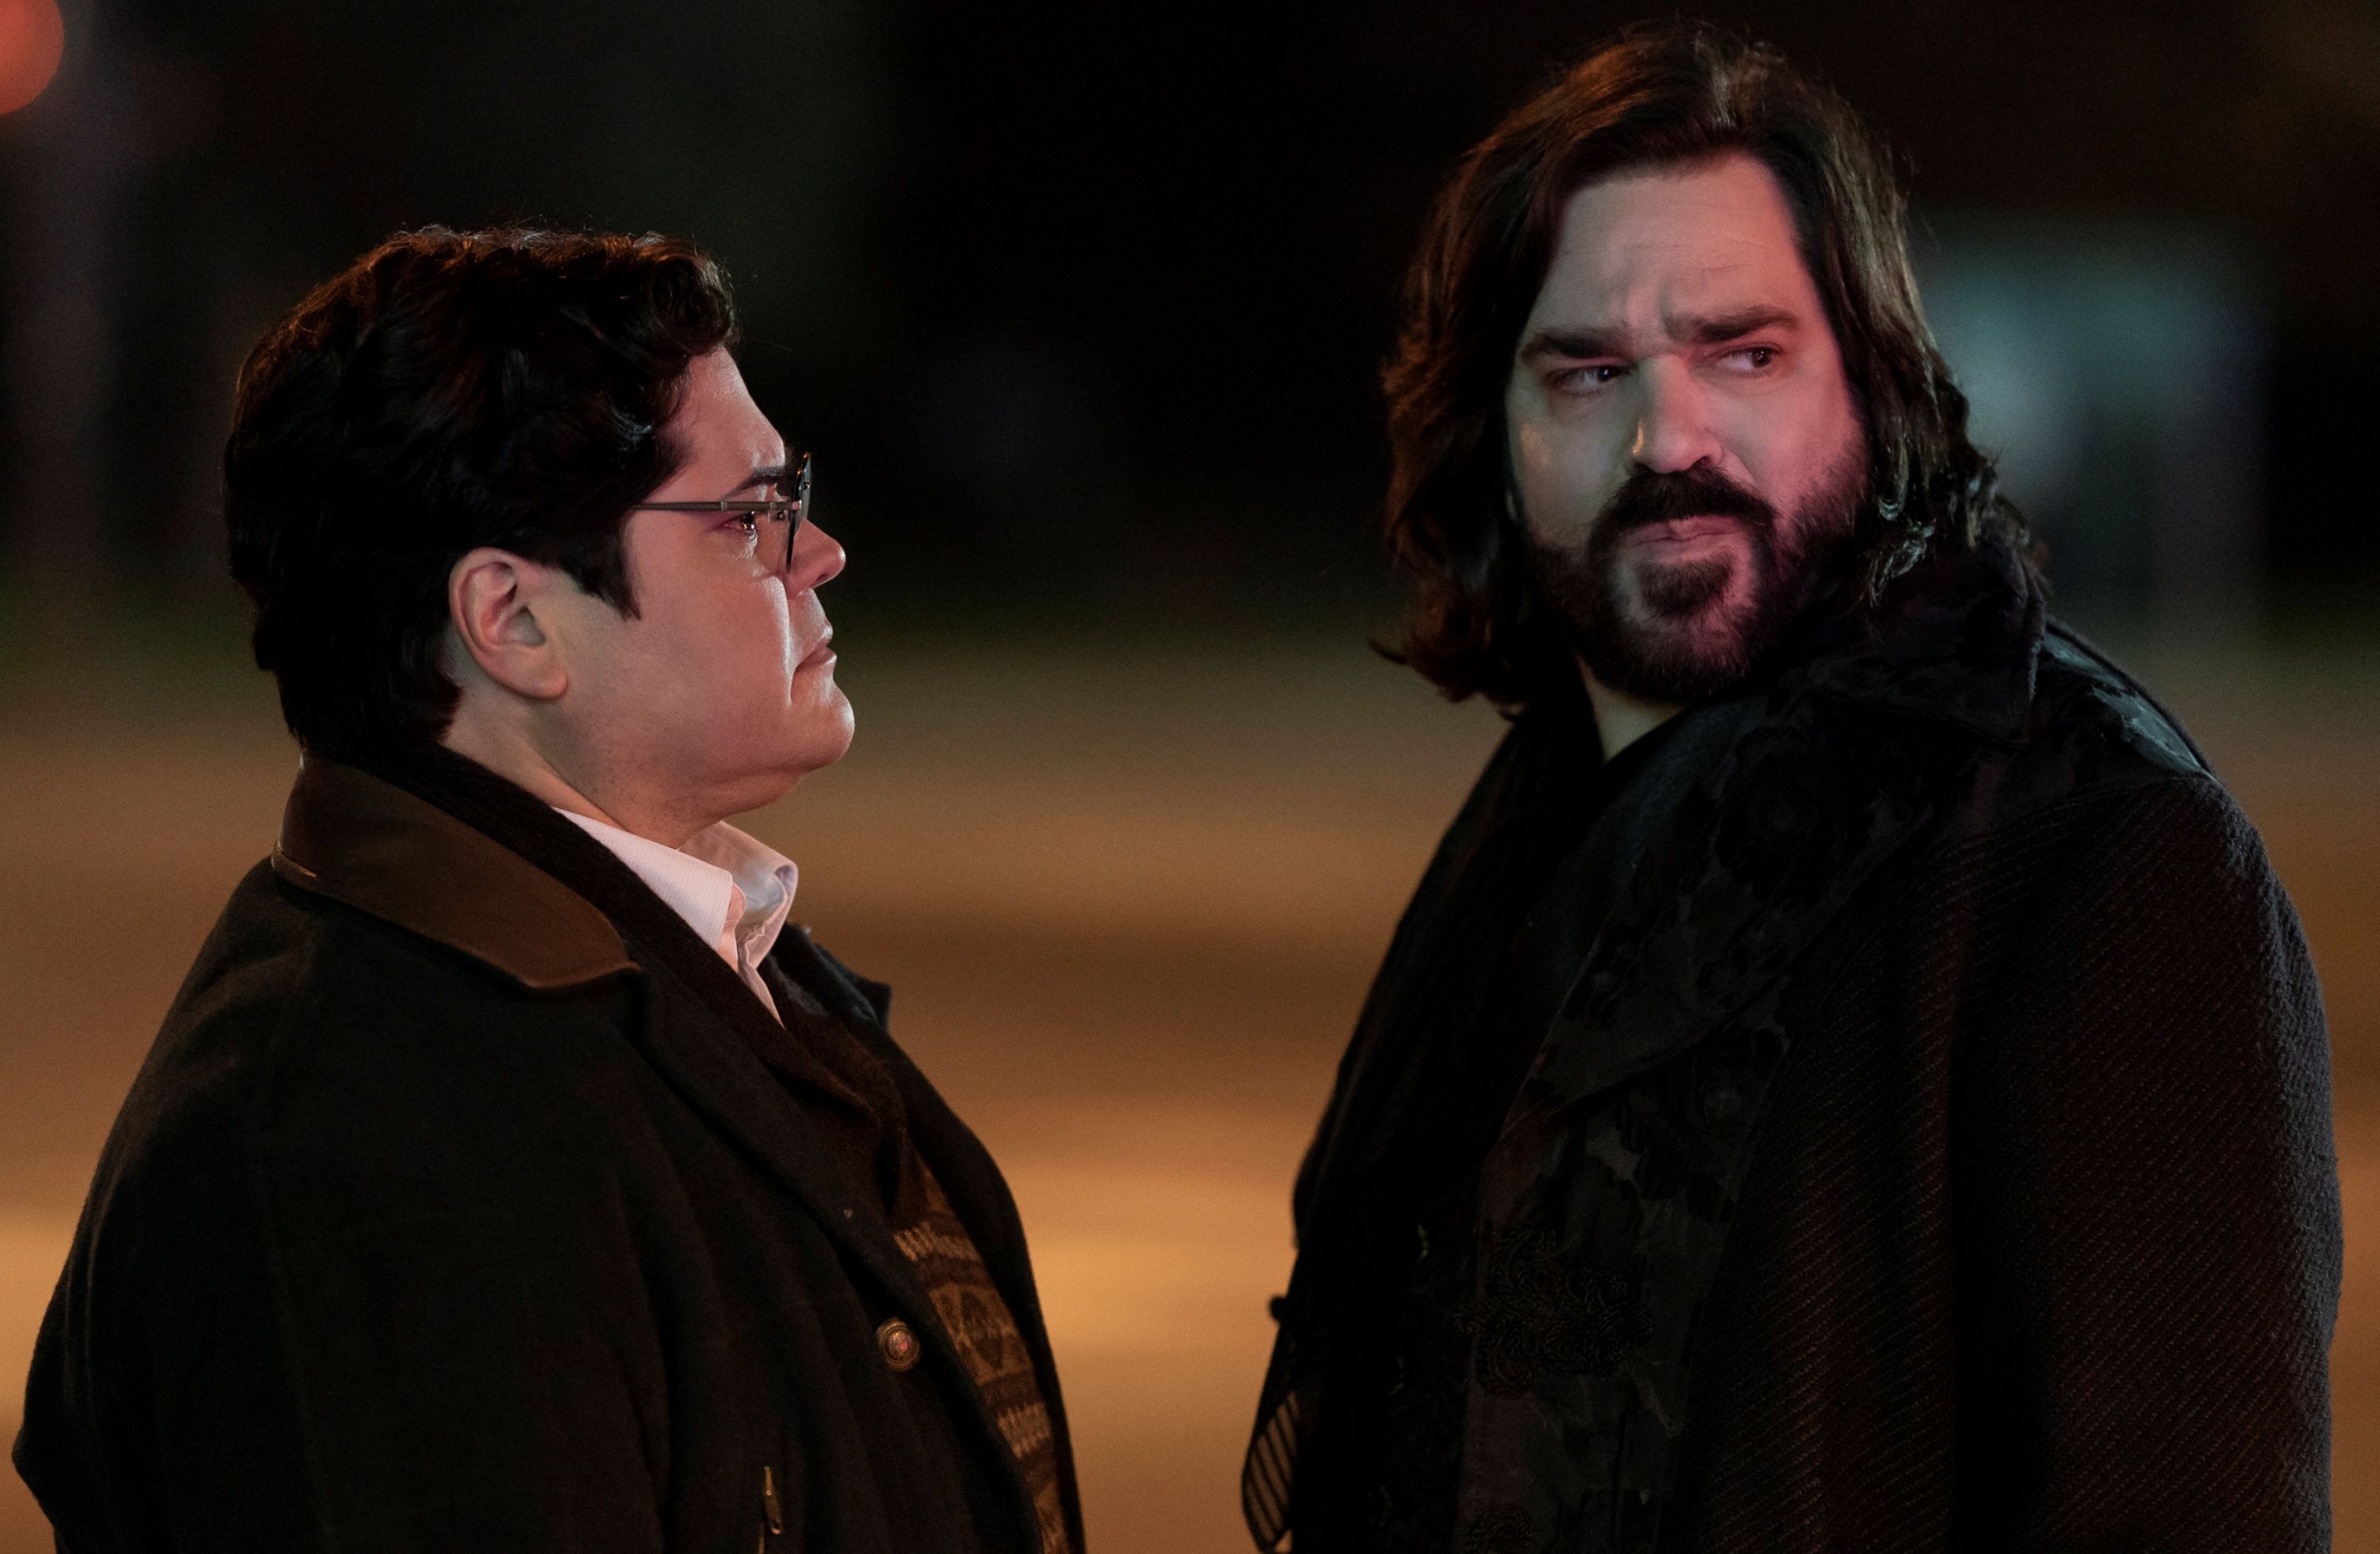 Harvey Guillén as Guillermo and Matt Berry as Laszlo in Season 5 of What We Do in the Shadows